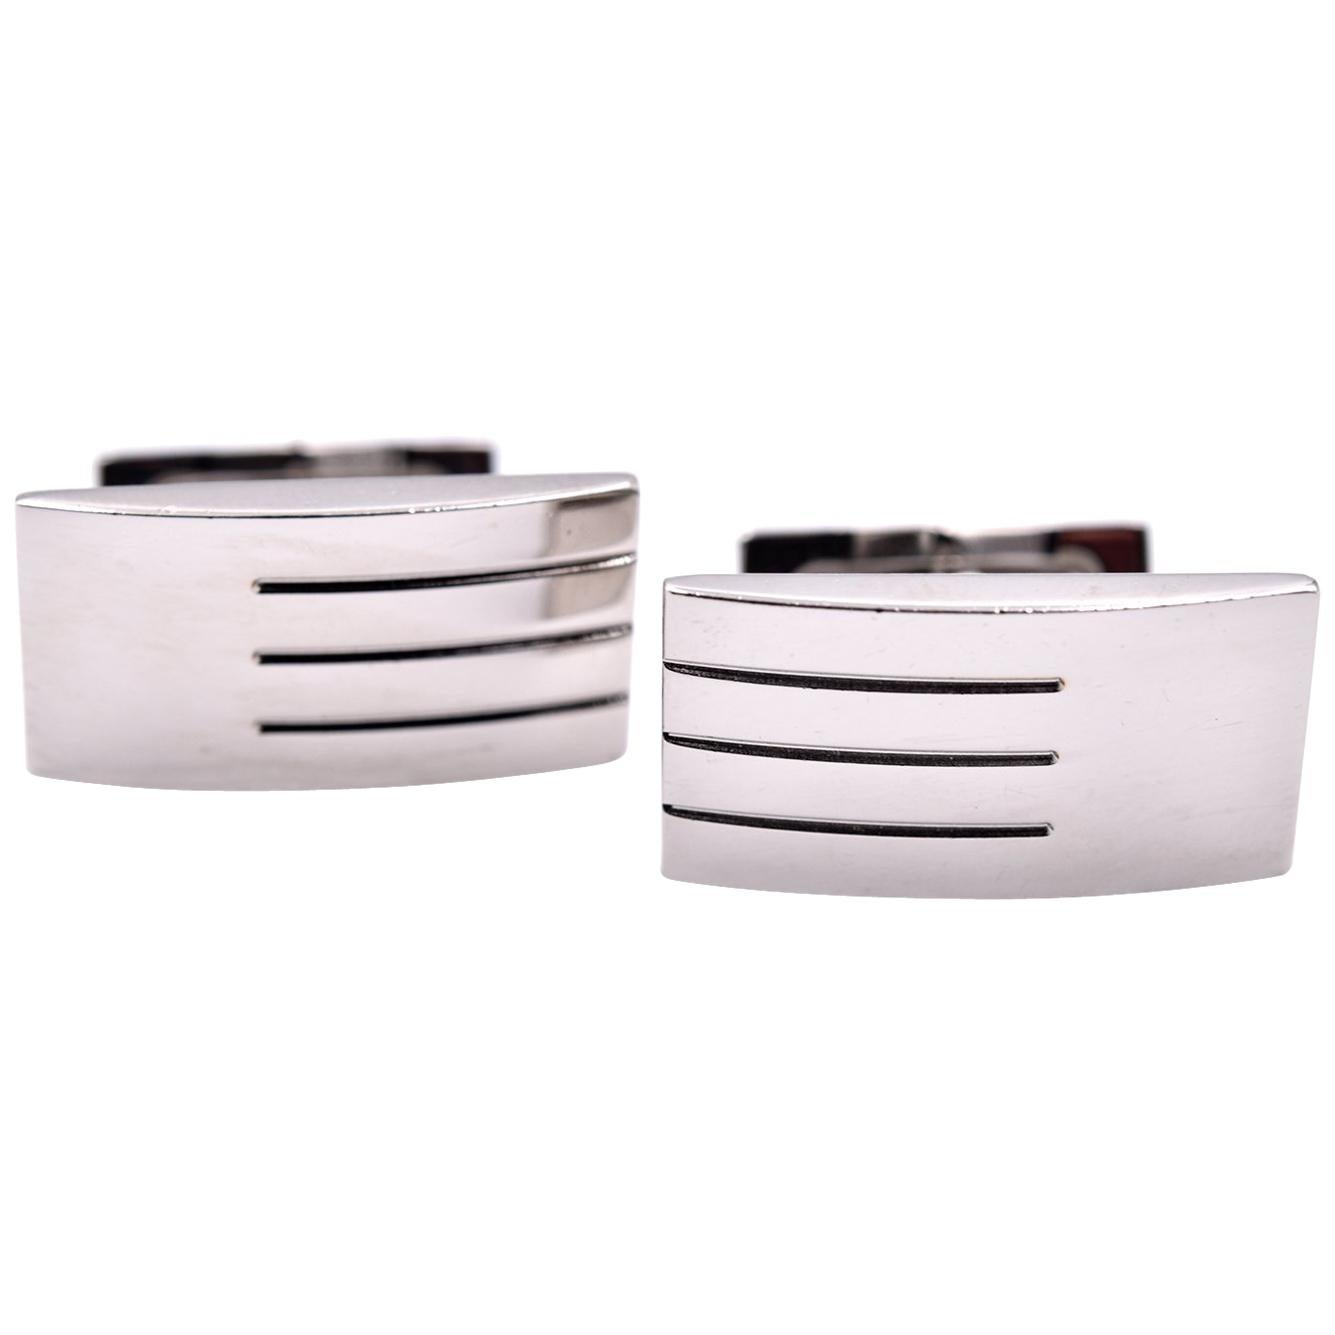 Dupont Stainless Steel Cufflinks with Box